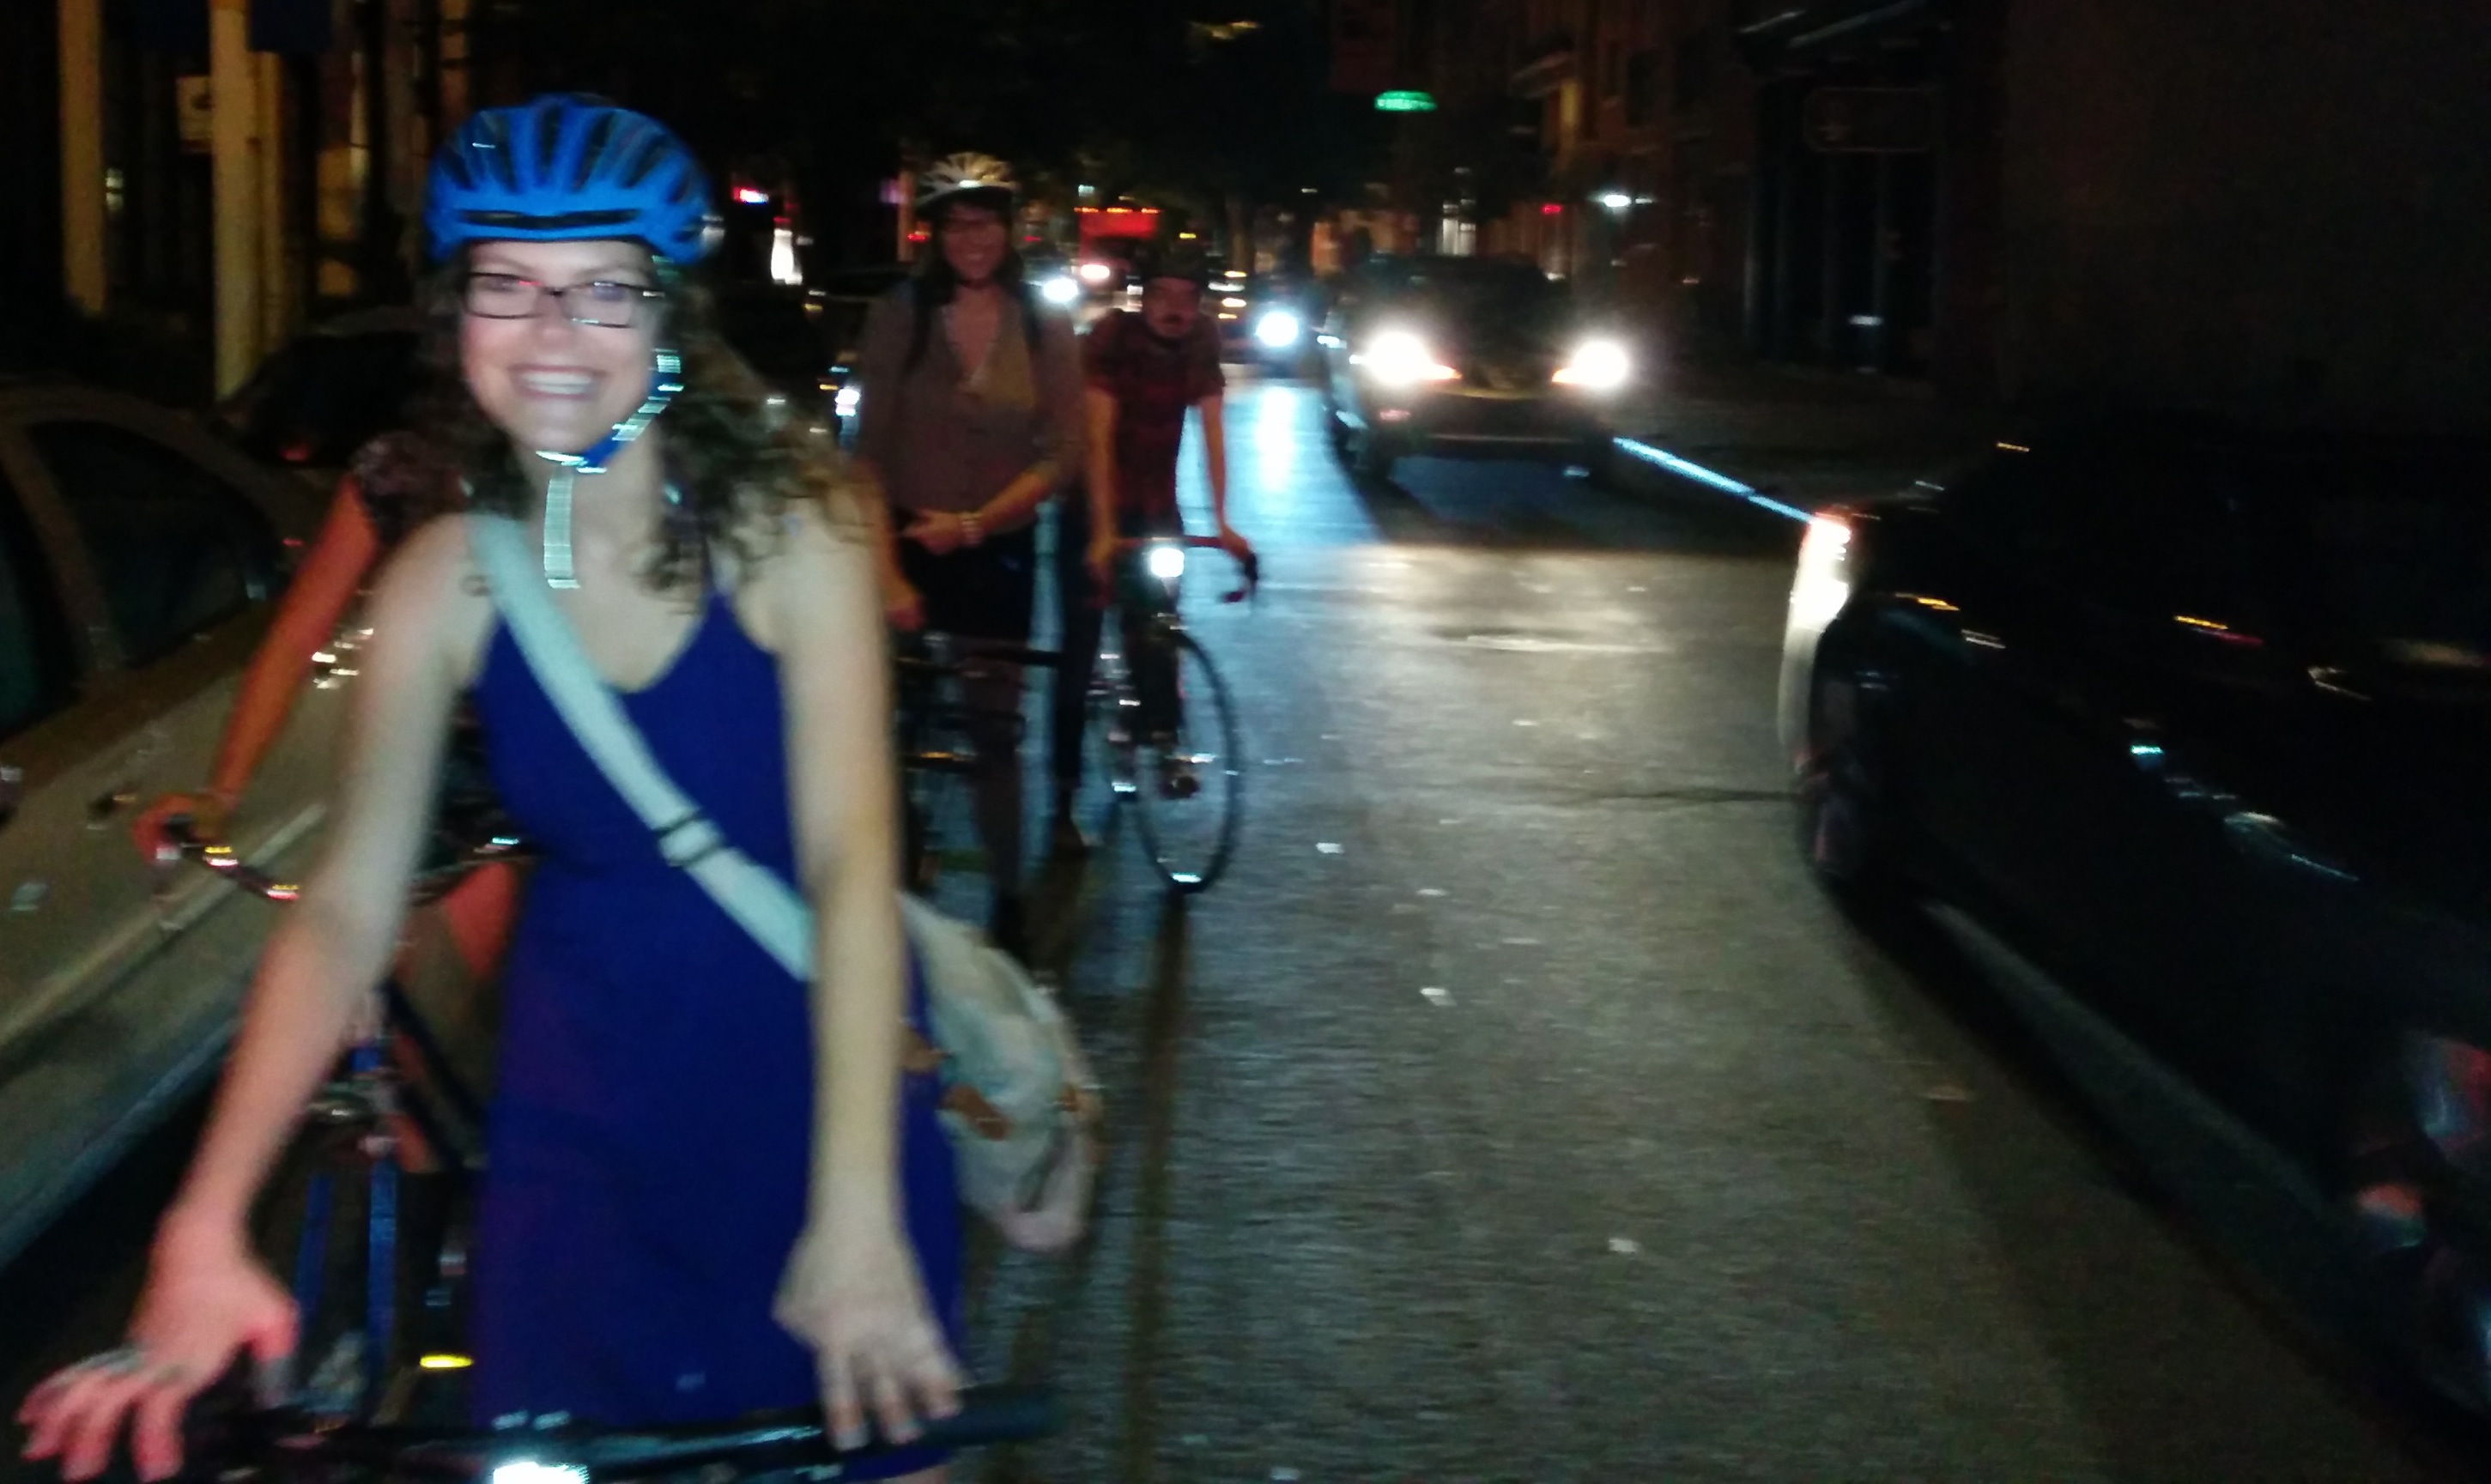 Phindie's Official Fringe Bike Tour